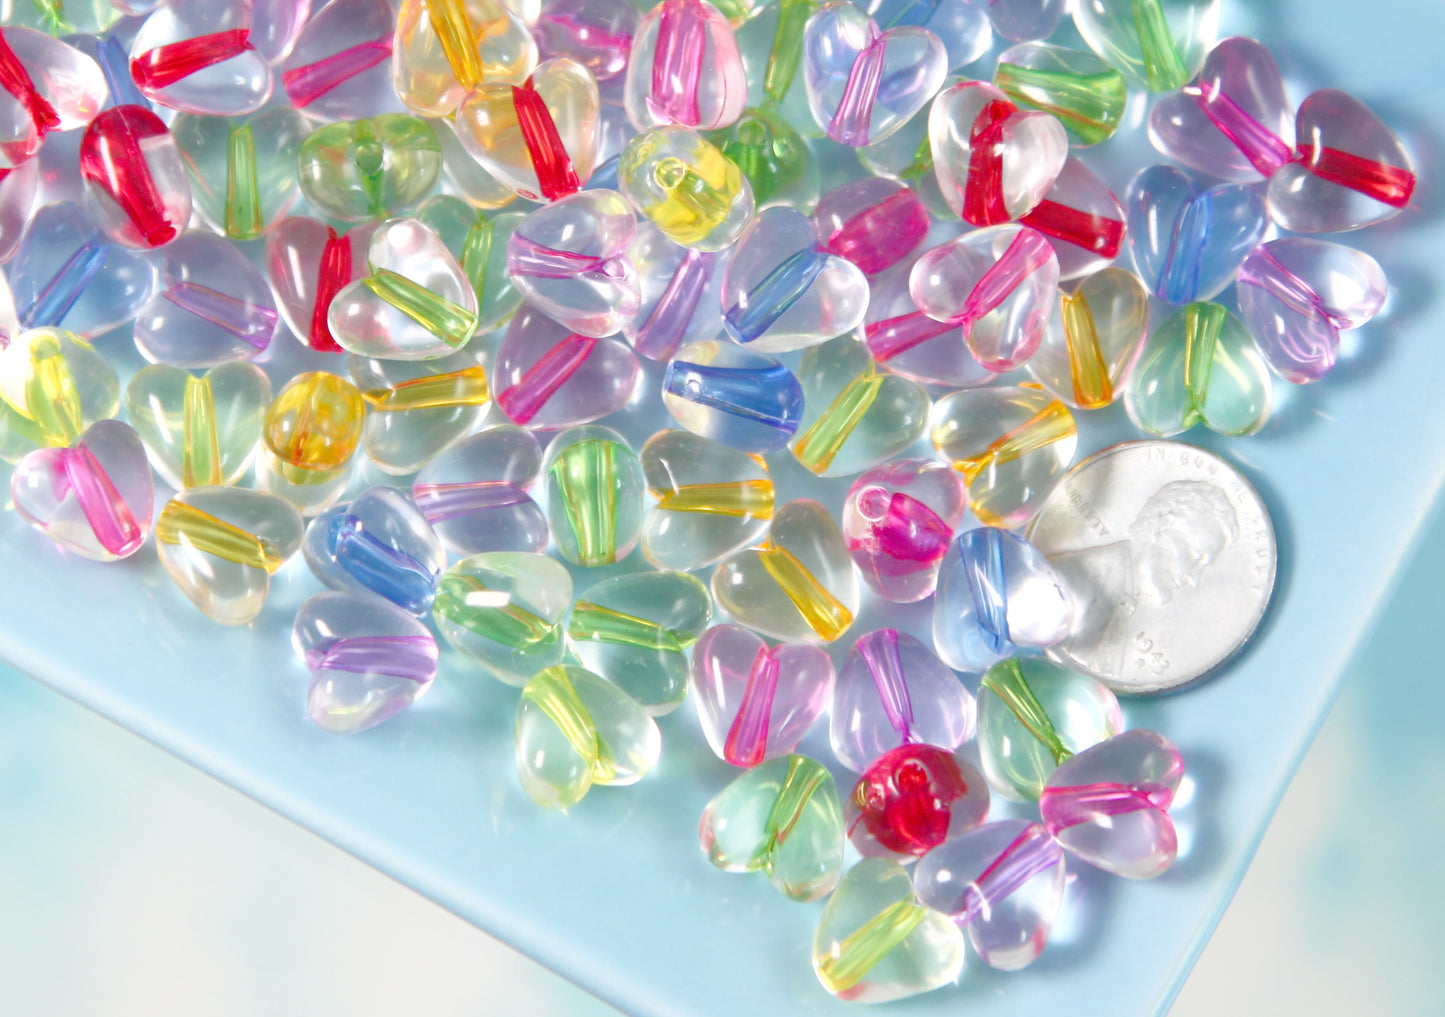 Heart Beads - 10mm Transparent with Colorful Core Heart Acrylic or Resin Beads - 100 pcs set